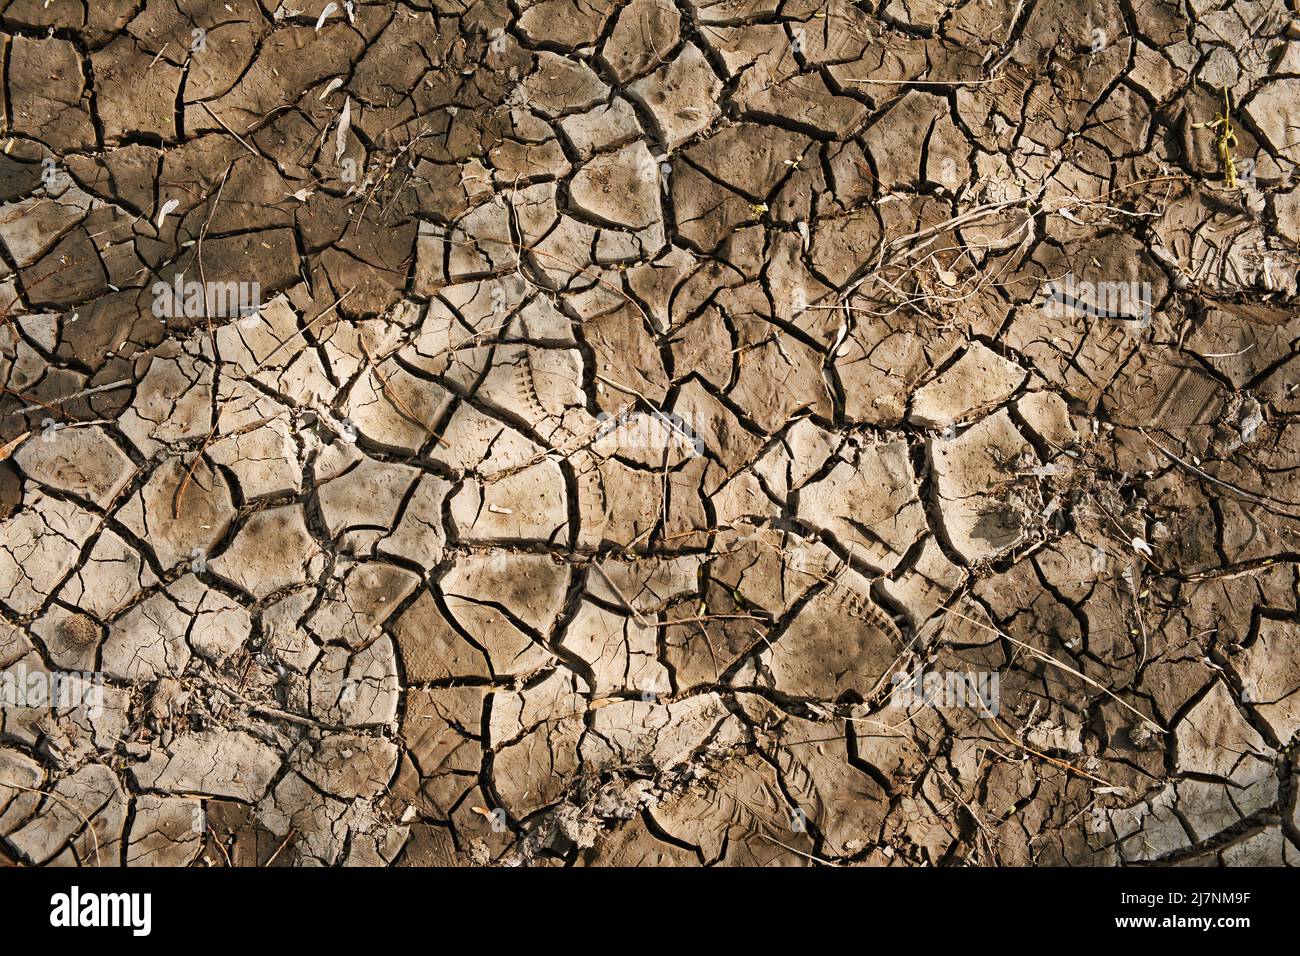 Texture of dry cracked land. Natural background. Arid climate illustration. Stock Photo